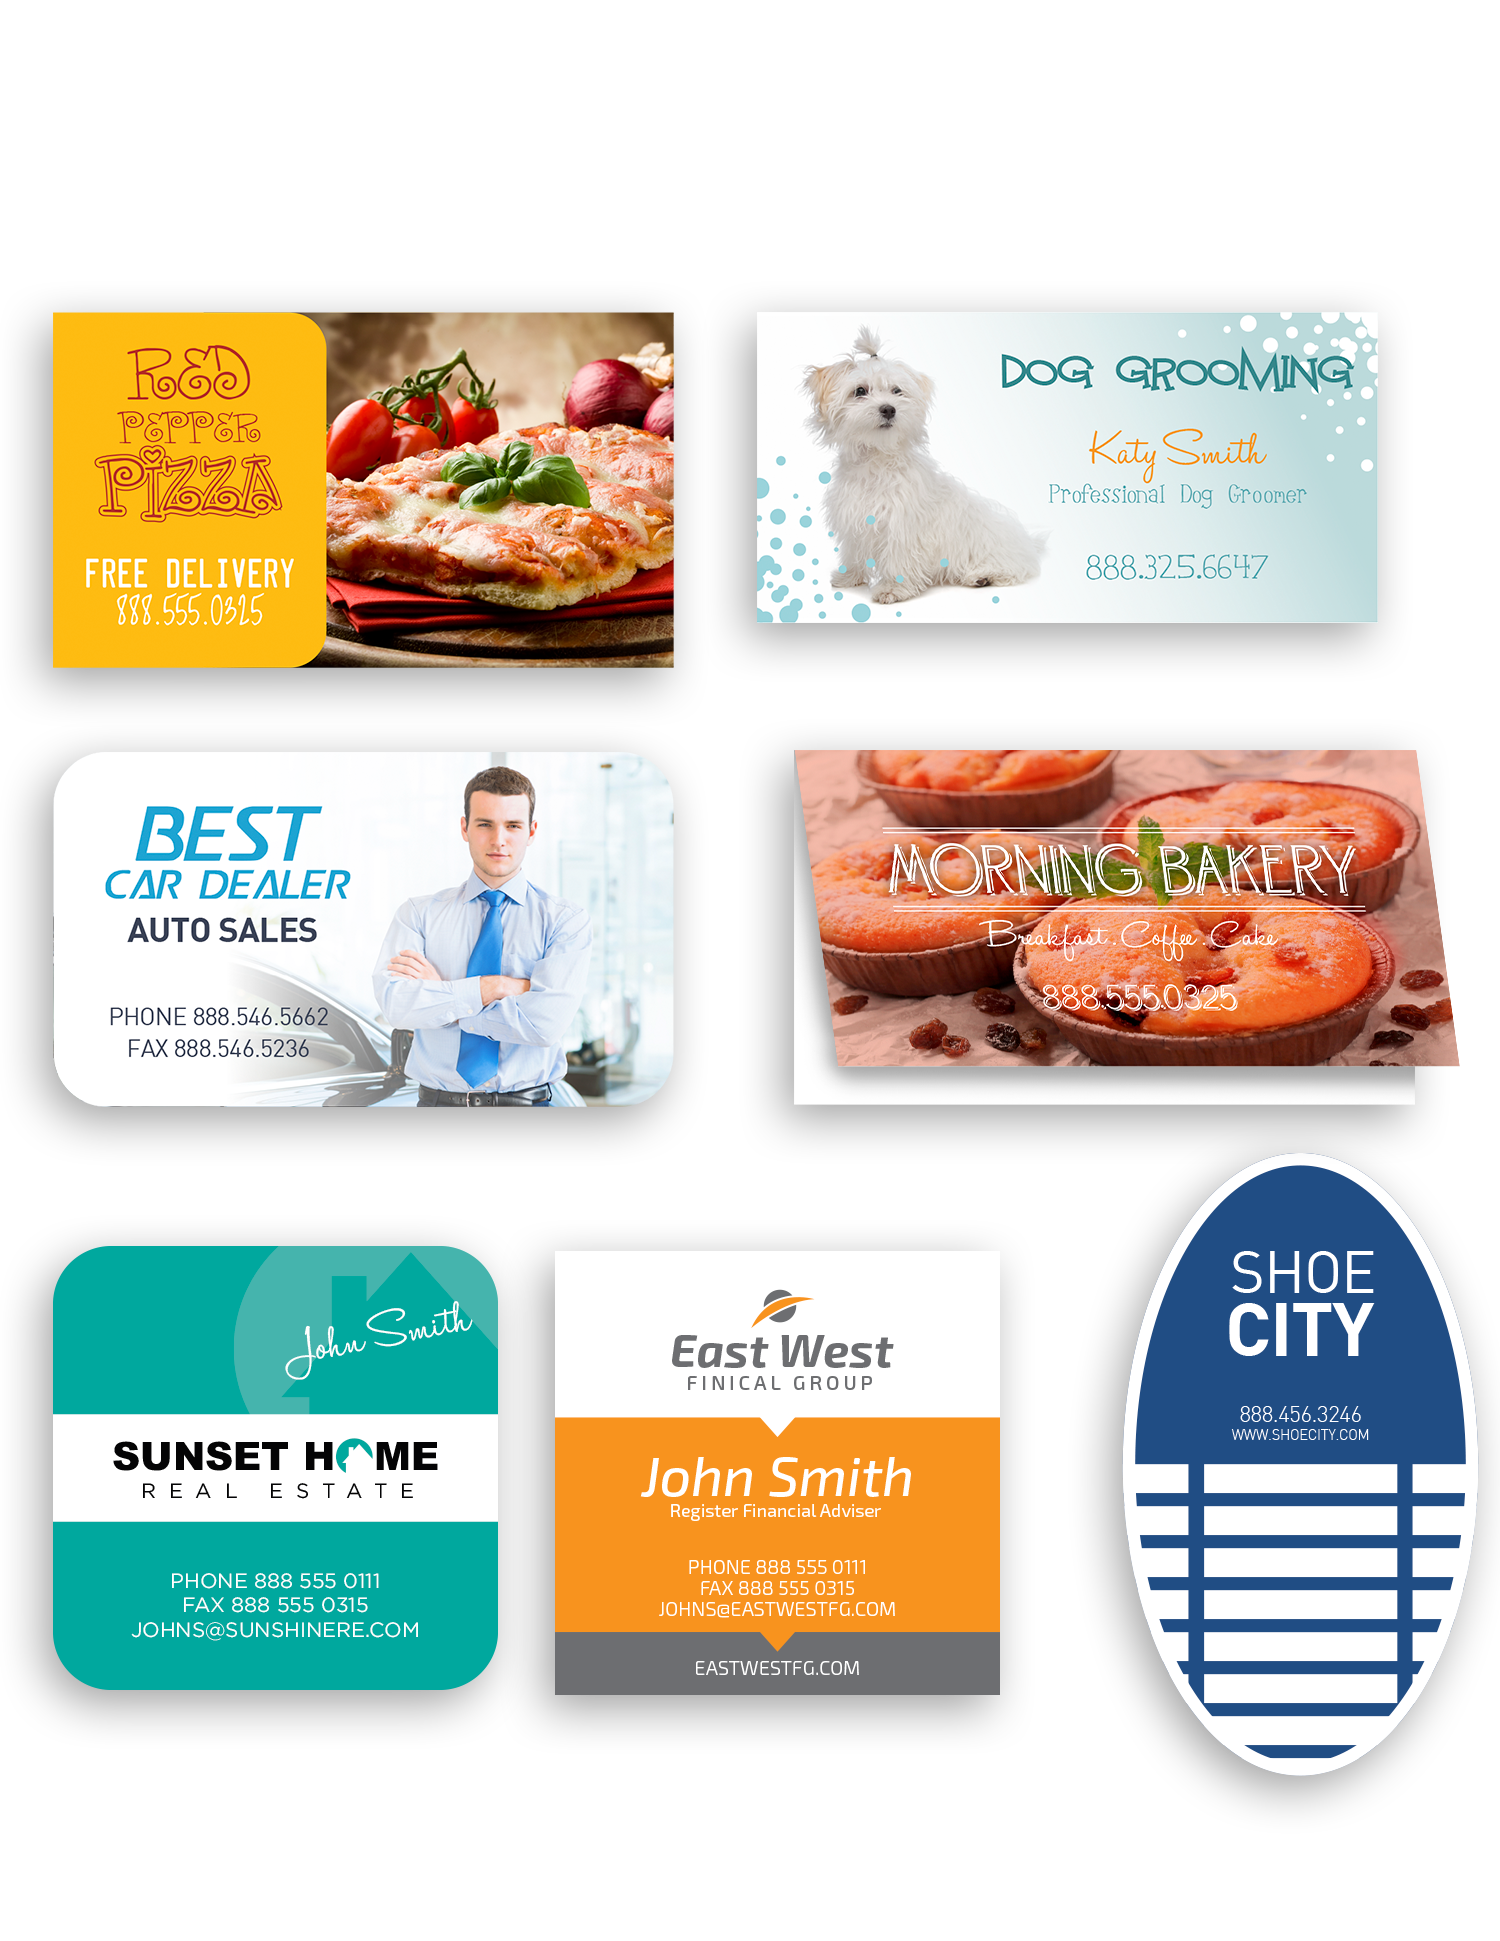 Business Card Printing - Full Color Printing Services - Roseville Printing California